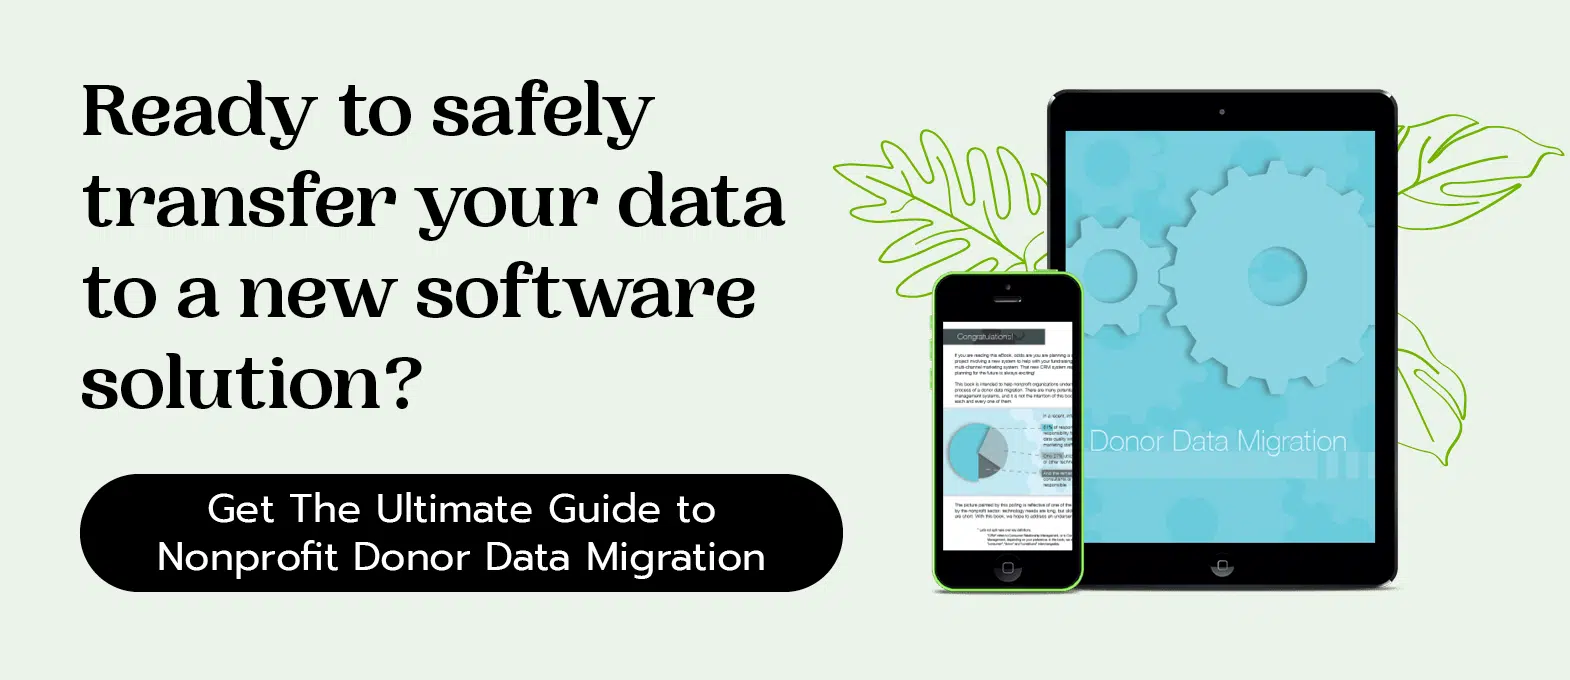 Ready to safely transfer your data to a new software solution? Get The Ultimate Guide to Nonprofit Donor Data Migration.